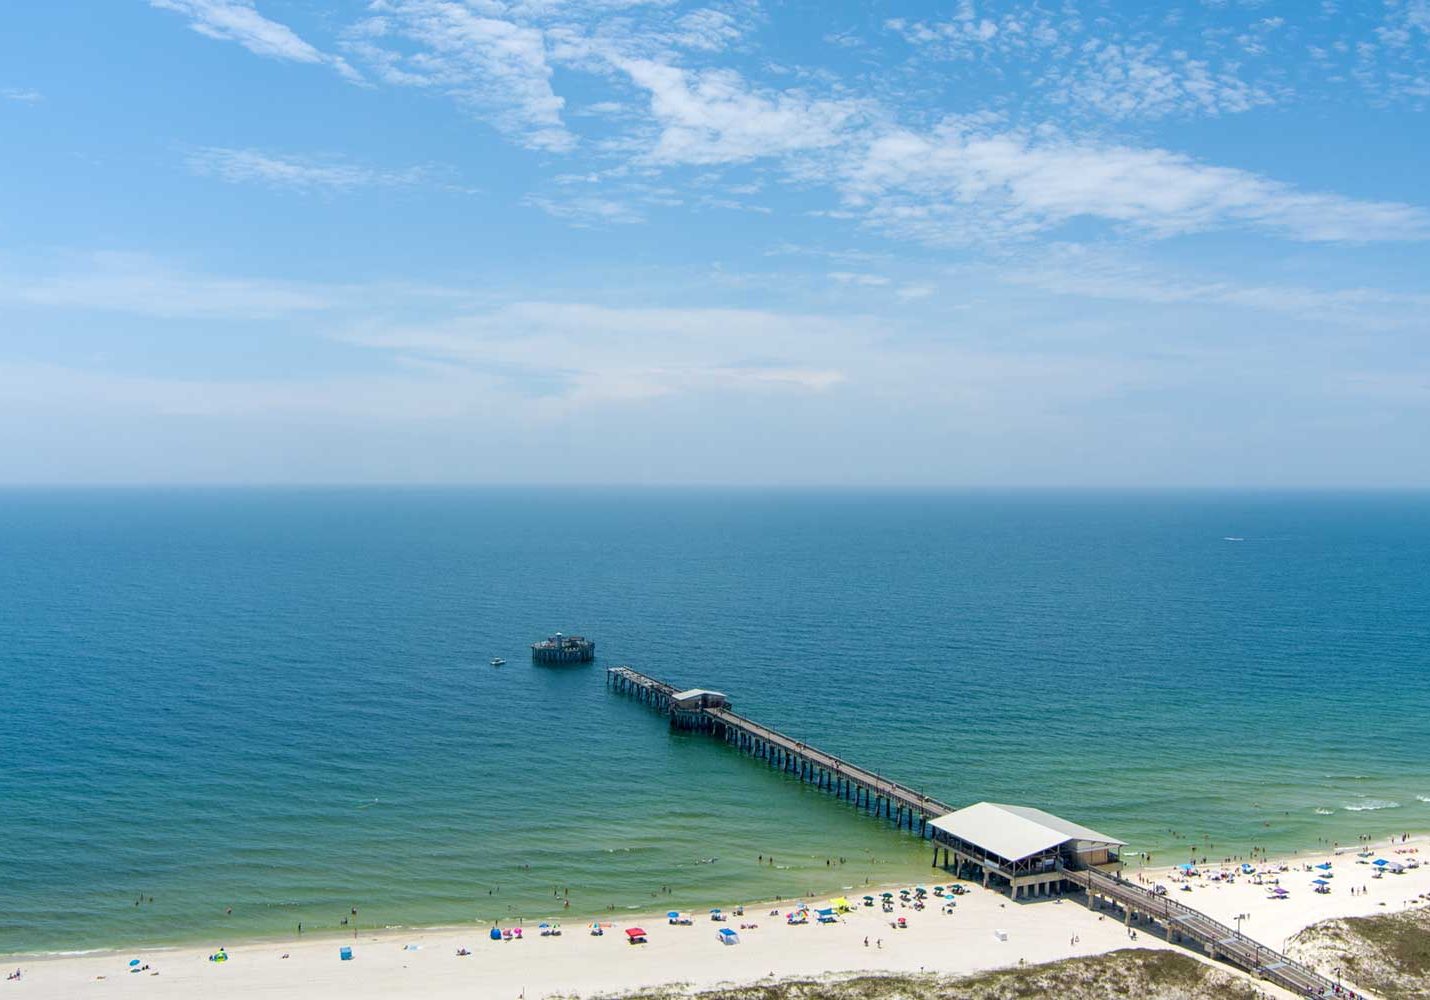 MD Thomas Construction Awarded Contract For Gulf State Park Pier Repair